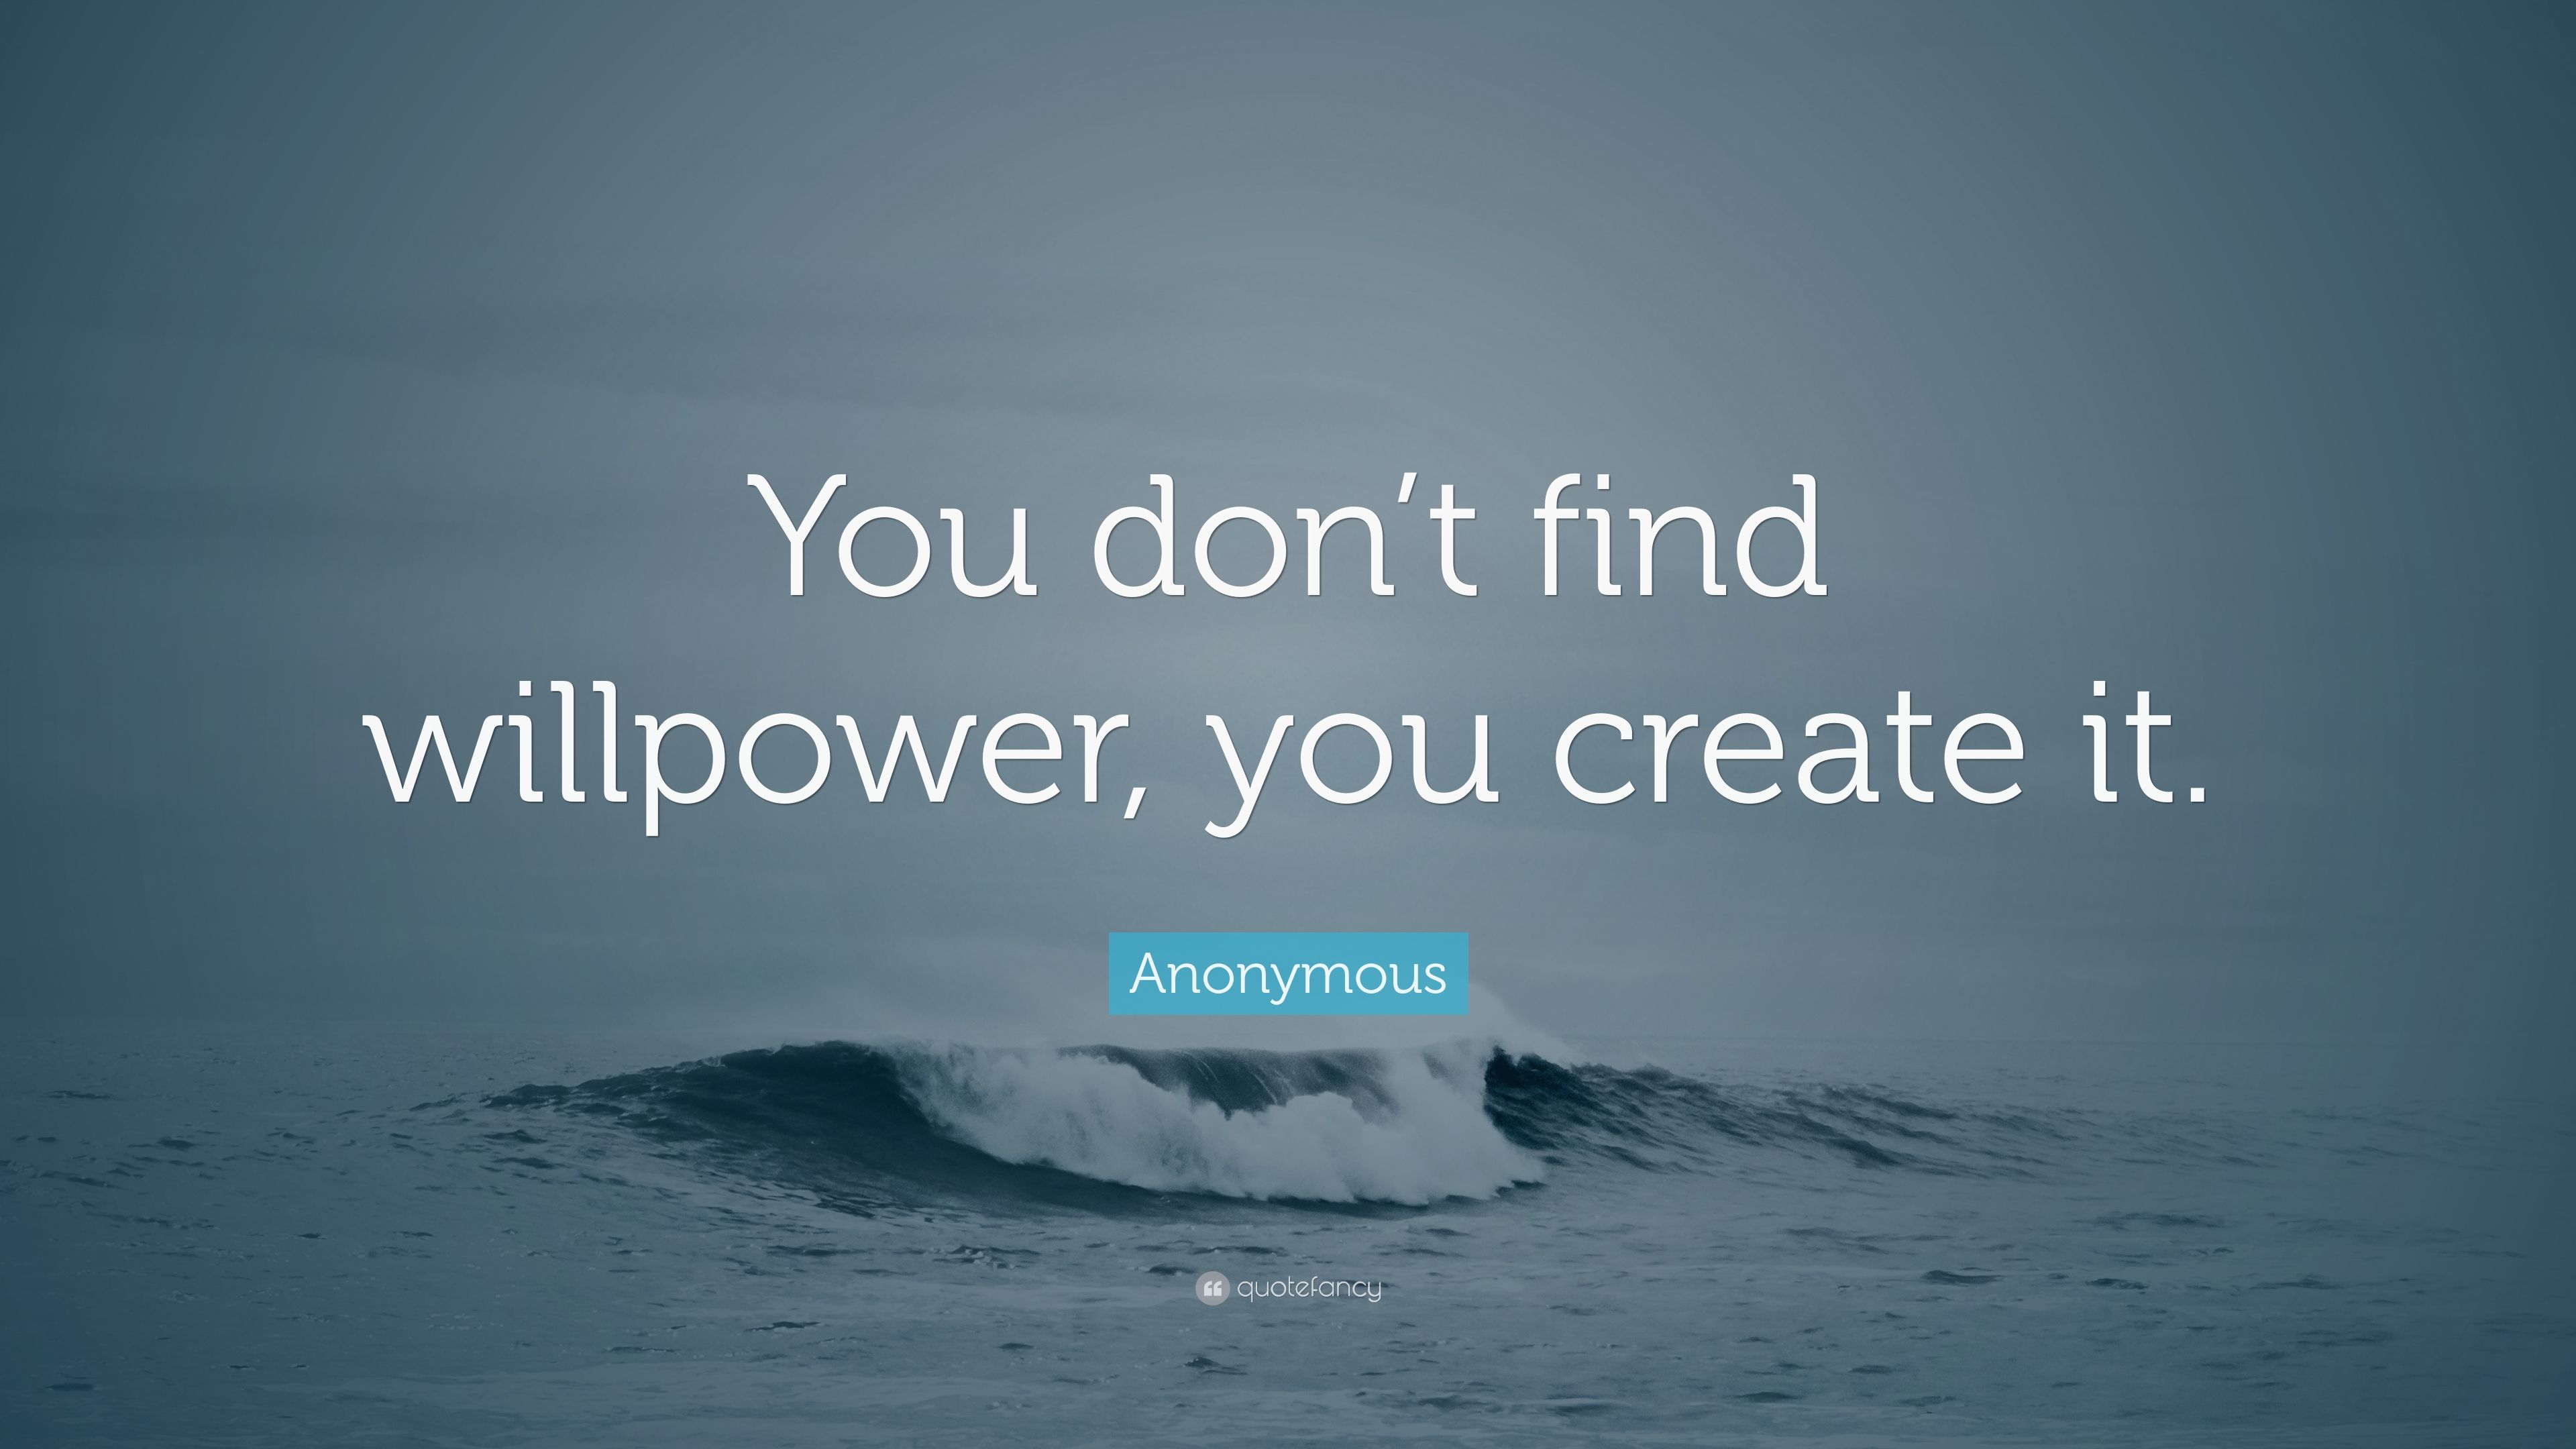 Anonymous Quote: “You don't find willpower, you create it.”